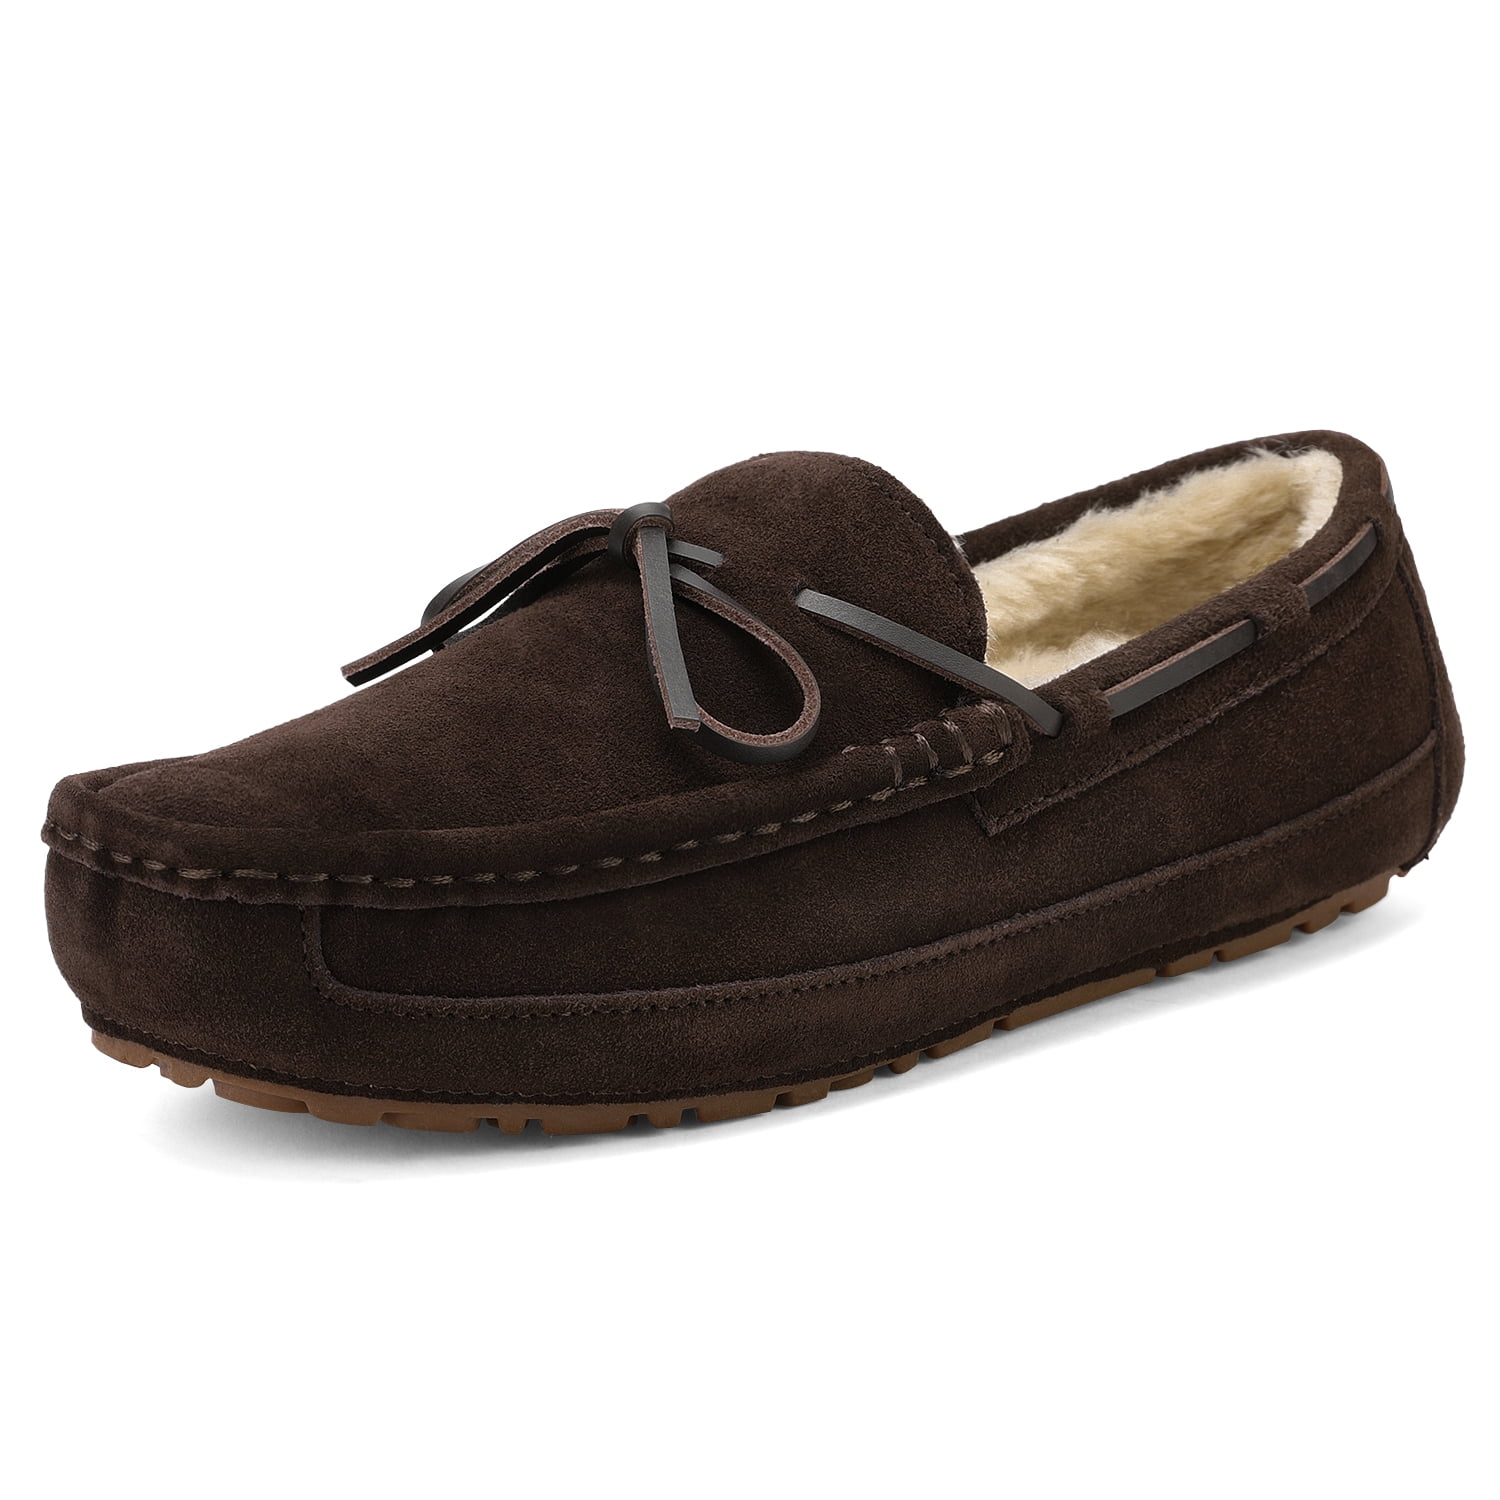 RockDove Mens Moccasin House Shoes Slippers Memory Foam Winter Brown 8 D M 